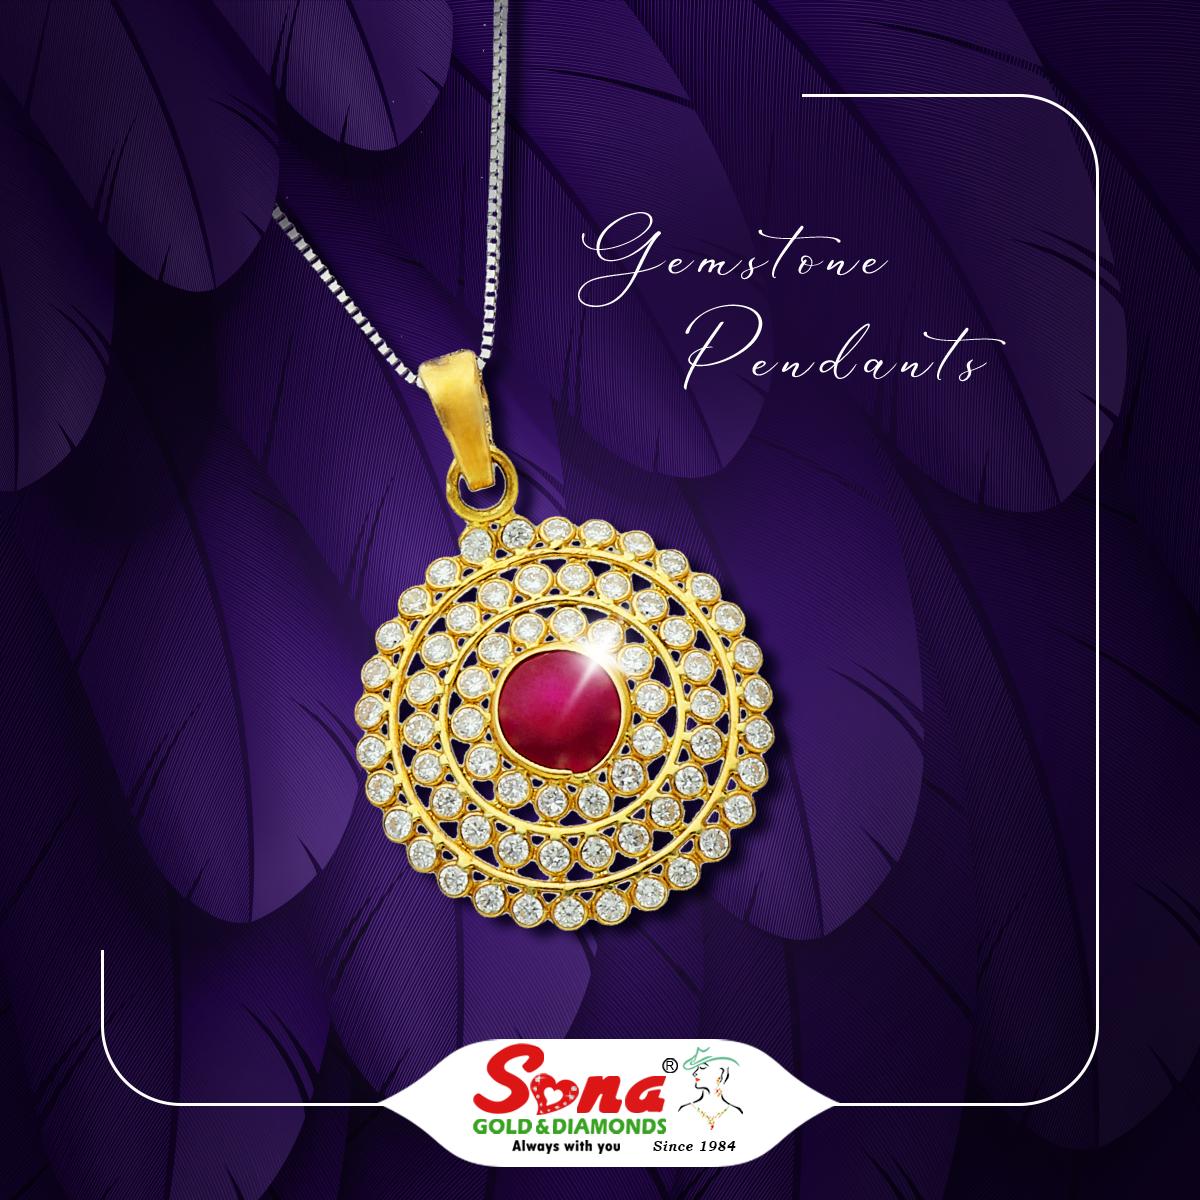 Buy yourself a gemstone studded pendant and make it your style statement.

#SonaGoldandDiamonds #JewelleryCollections #pendantcollection #genstone #necklaceaddict #NecklaceSet #bestpendant #weddingpendant #partypendant #pendants #pendant #beautifulpendant